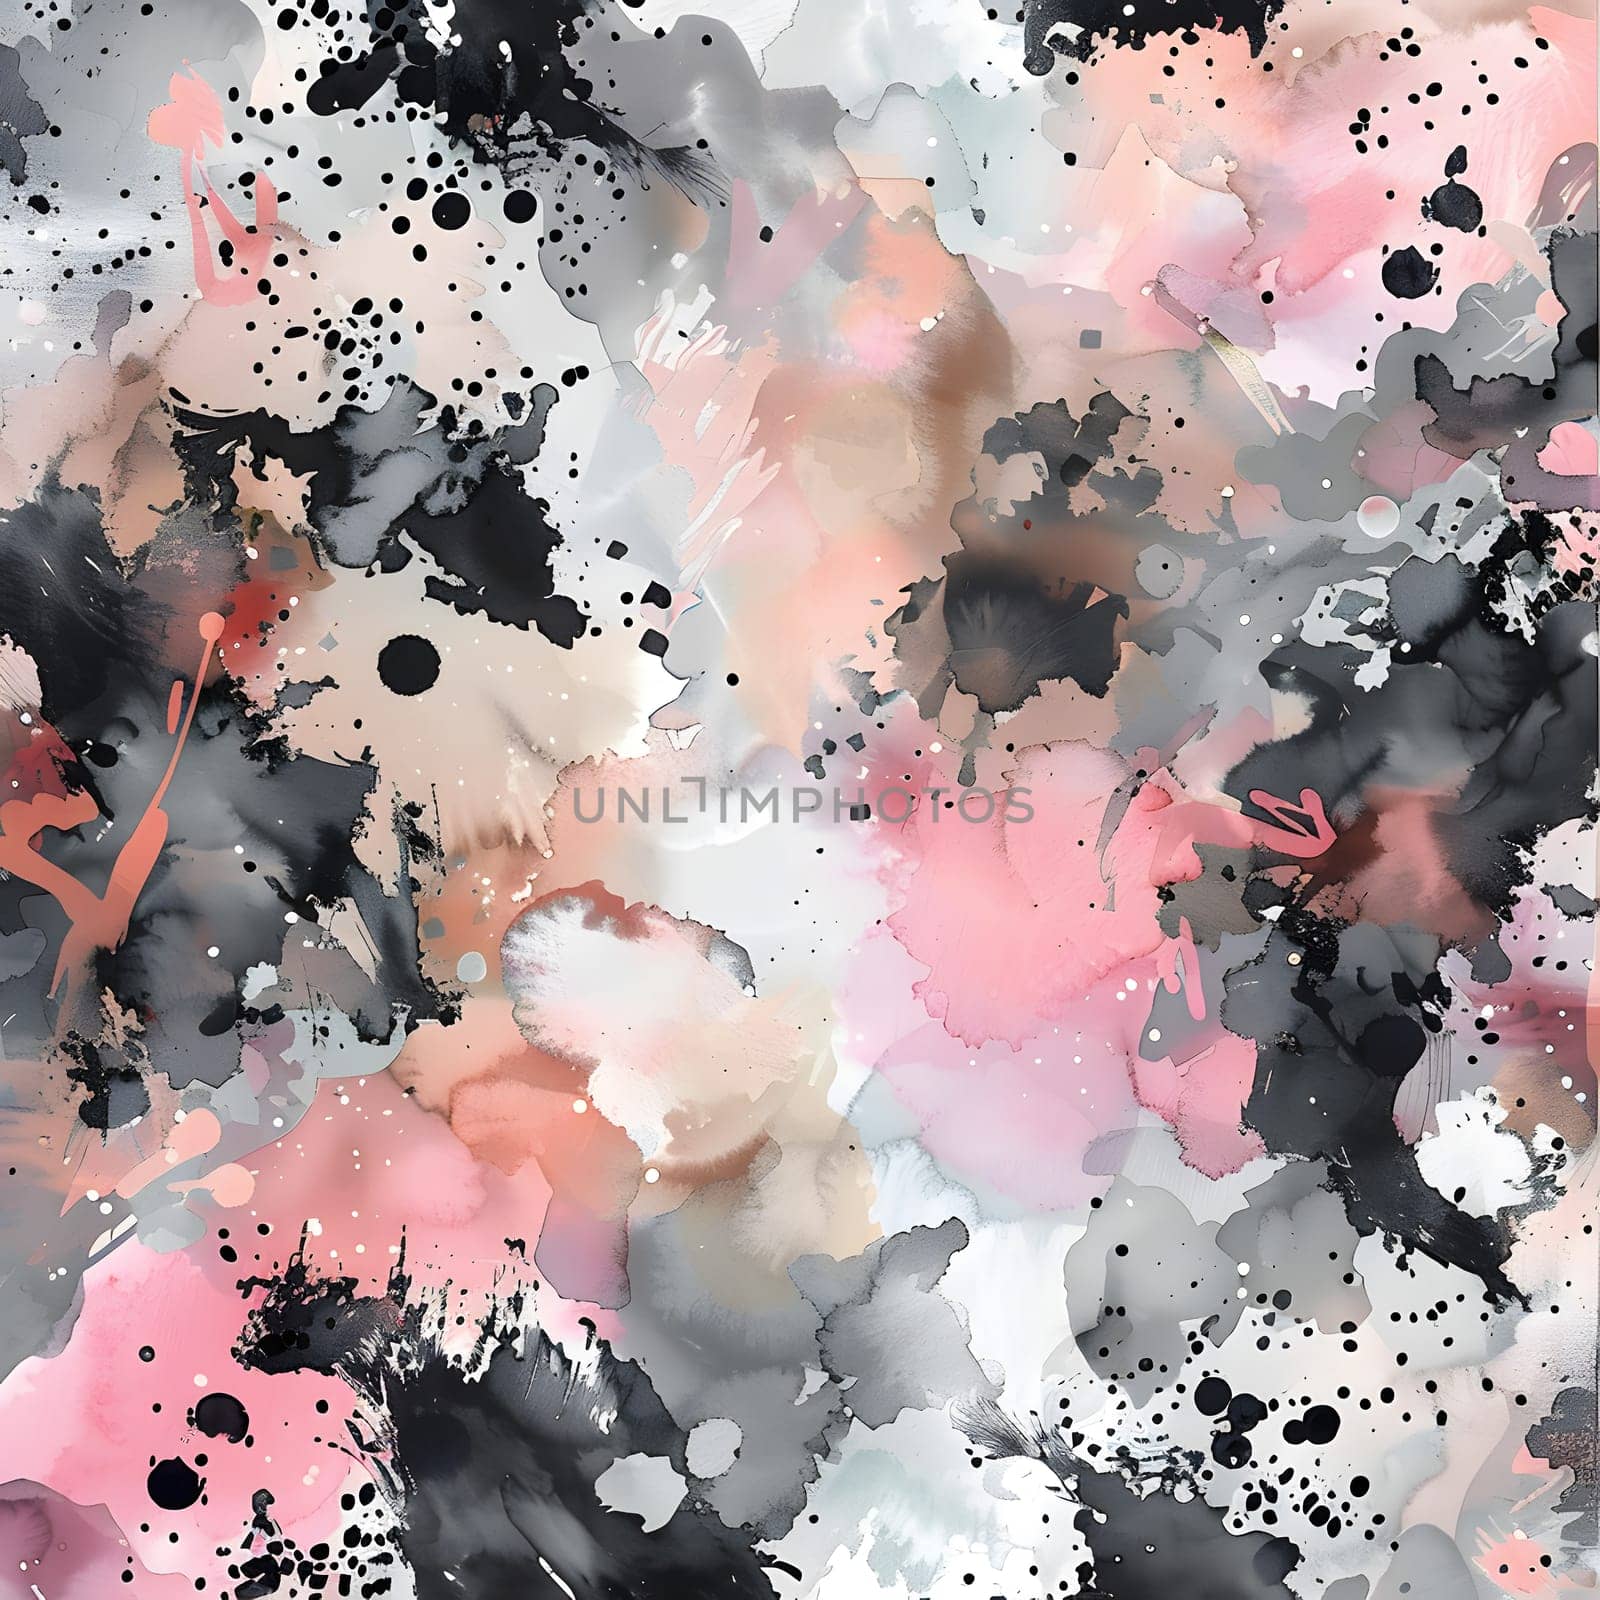 a seamless pattern of pink , black and white paint splashes on a white background by Nadtochiy